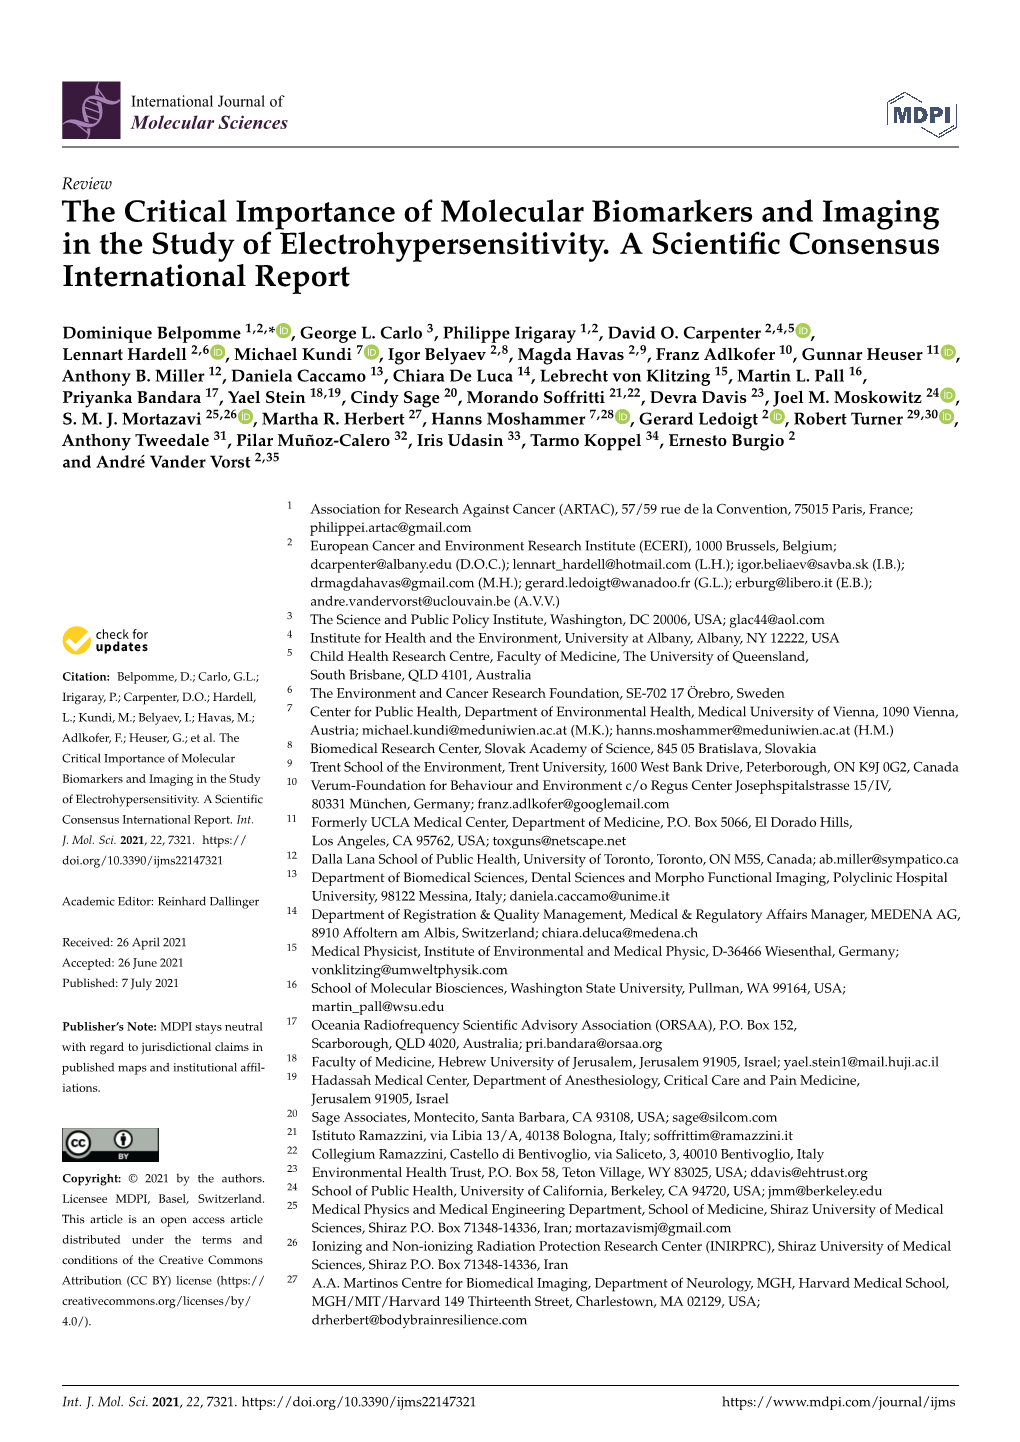 The Critical Importance of Molecular Biomarkers and Imaging in the Study of Electrohypersensitivity. a Scientific Consensus Inte